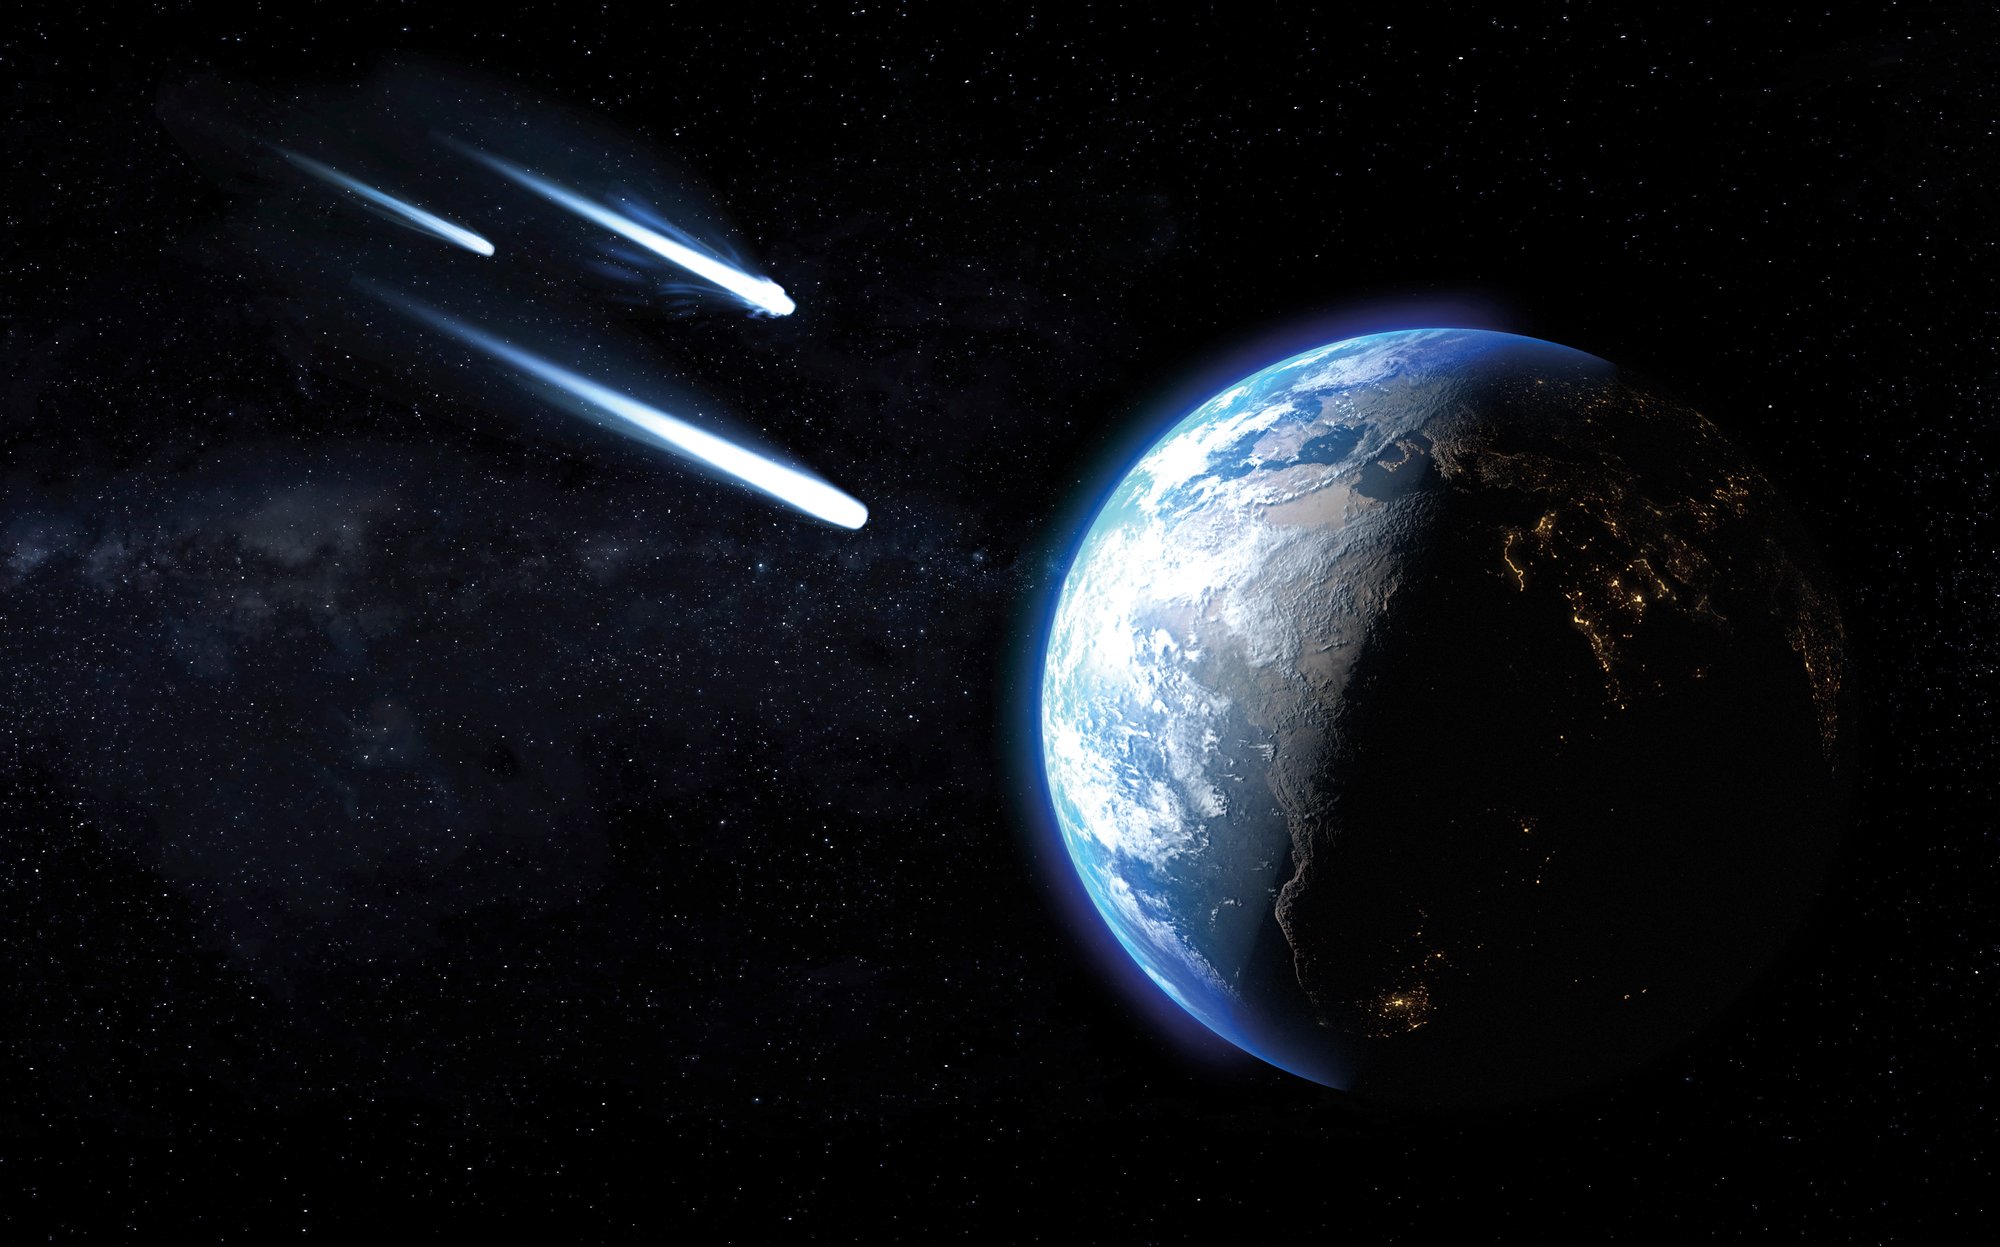 Asteroids hit Earth ten times earlier than thought